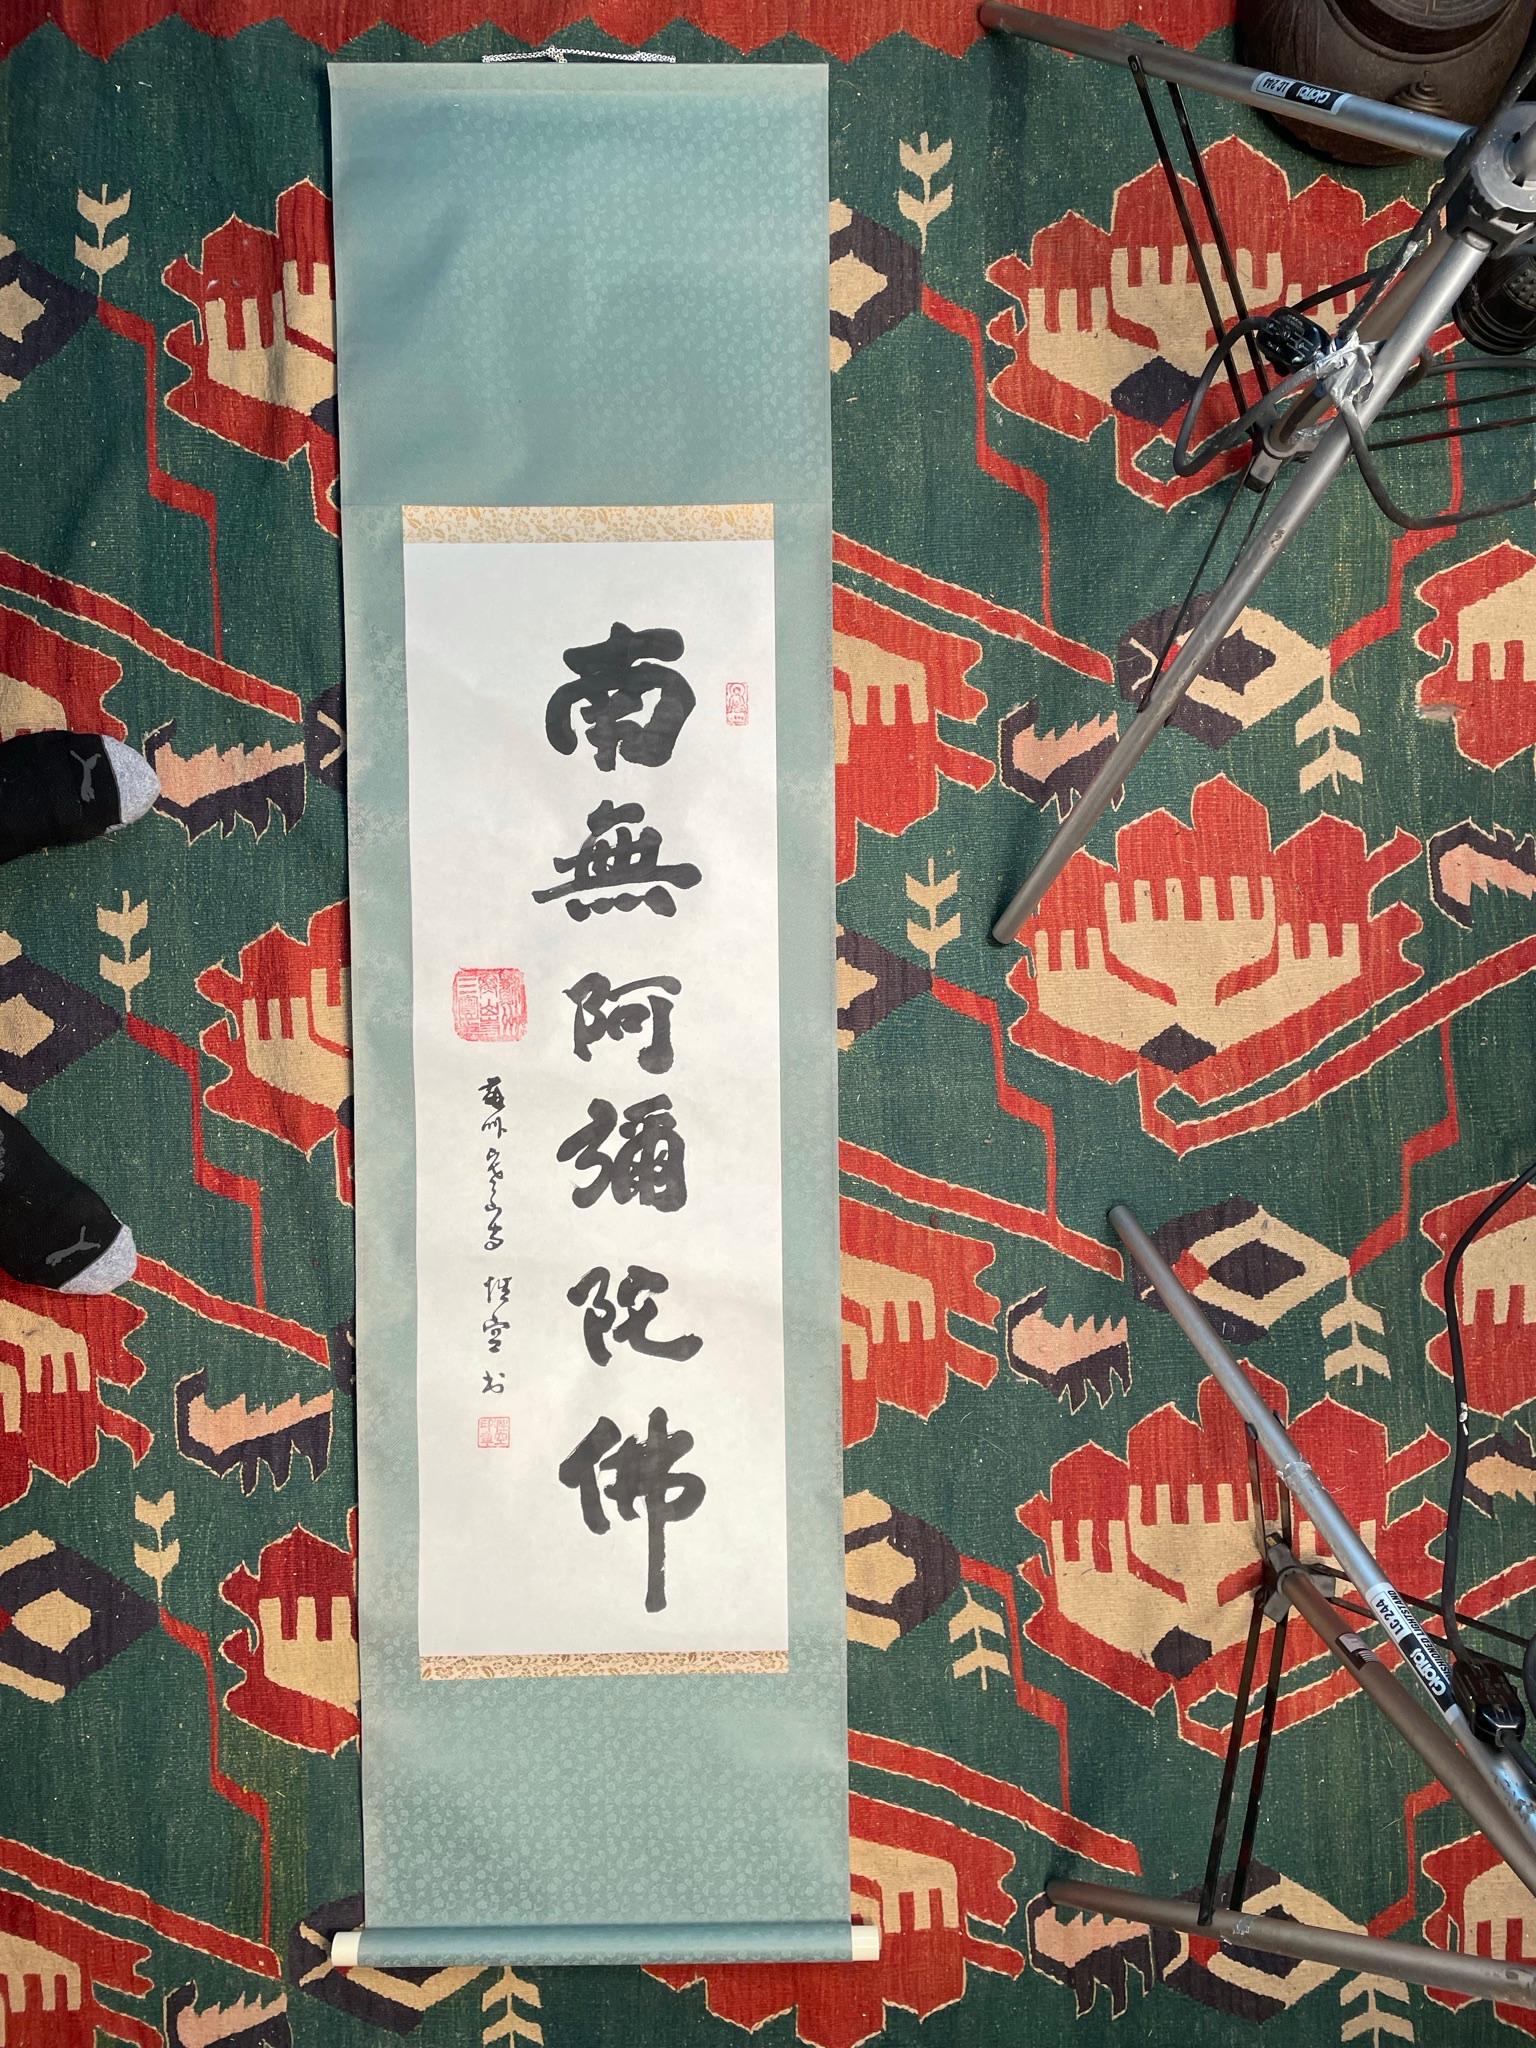 A beautiful silk scroll from our recent Japanese Acquisitions Travels

A unique big and bold hand painted 